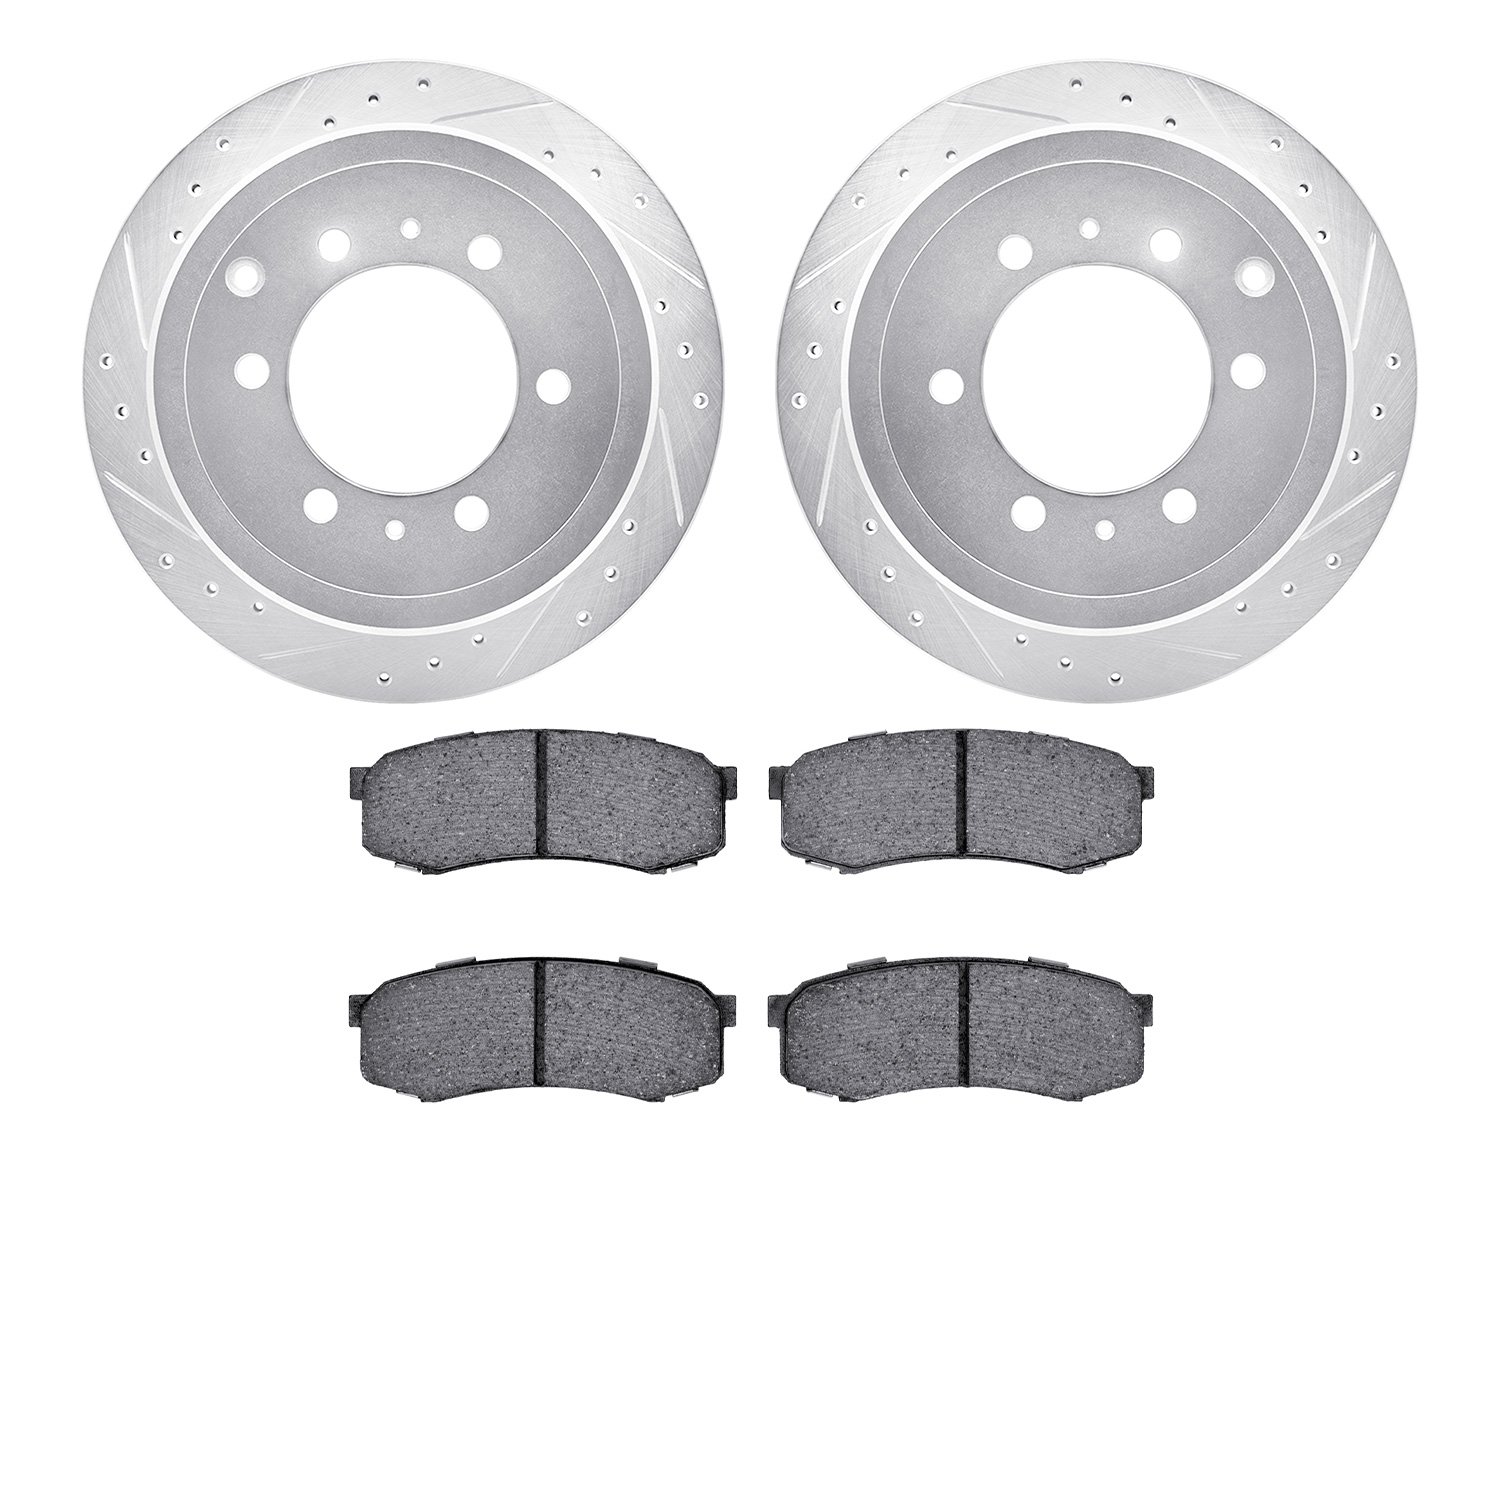 7402-76010 Drilled/Slotted Brake Rotors with Ultimate-Duty Brake Pads Kit [Silver], 1993-1997 Lexus/Toyota/Scion, Position: Rear